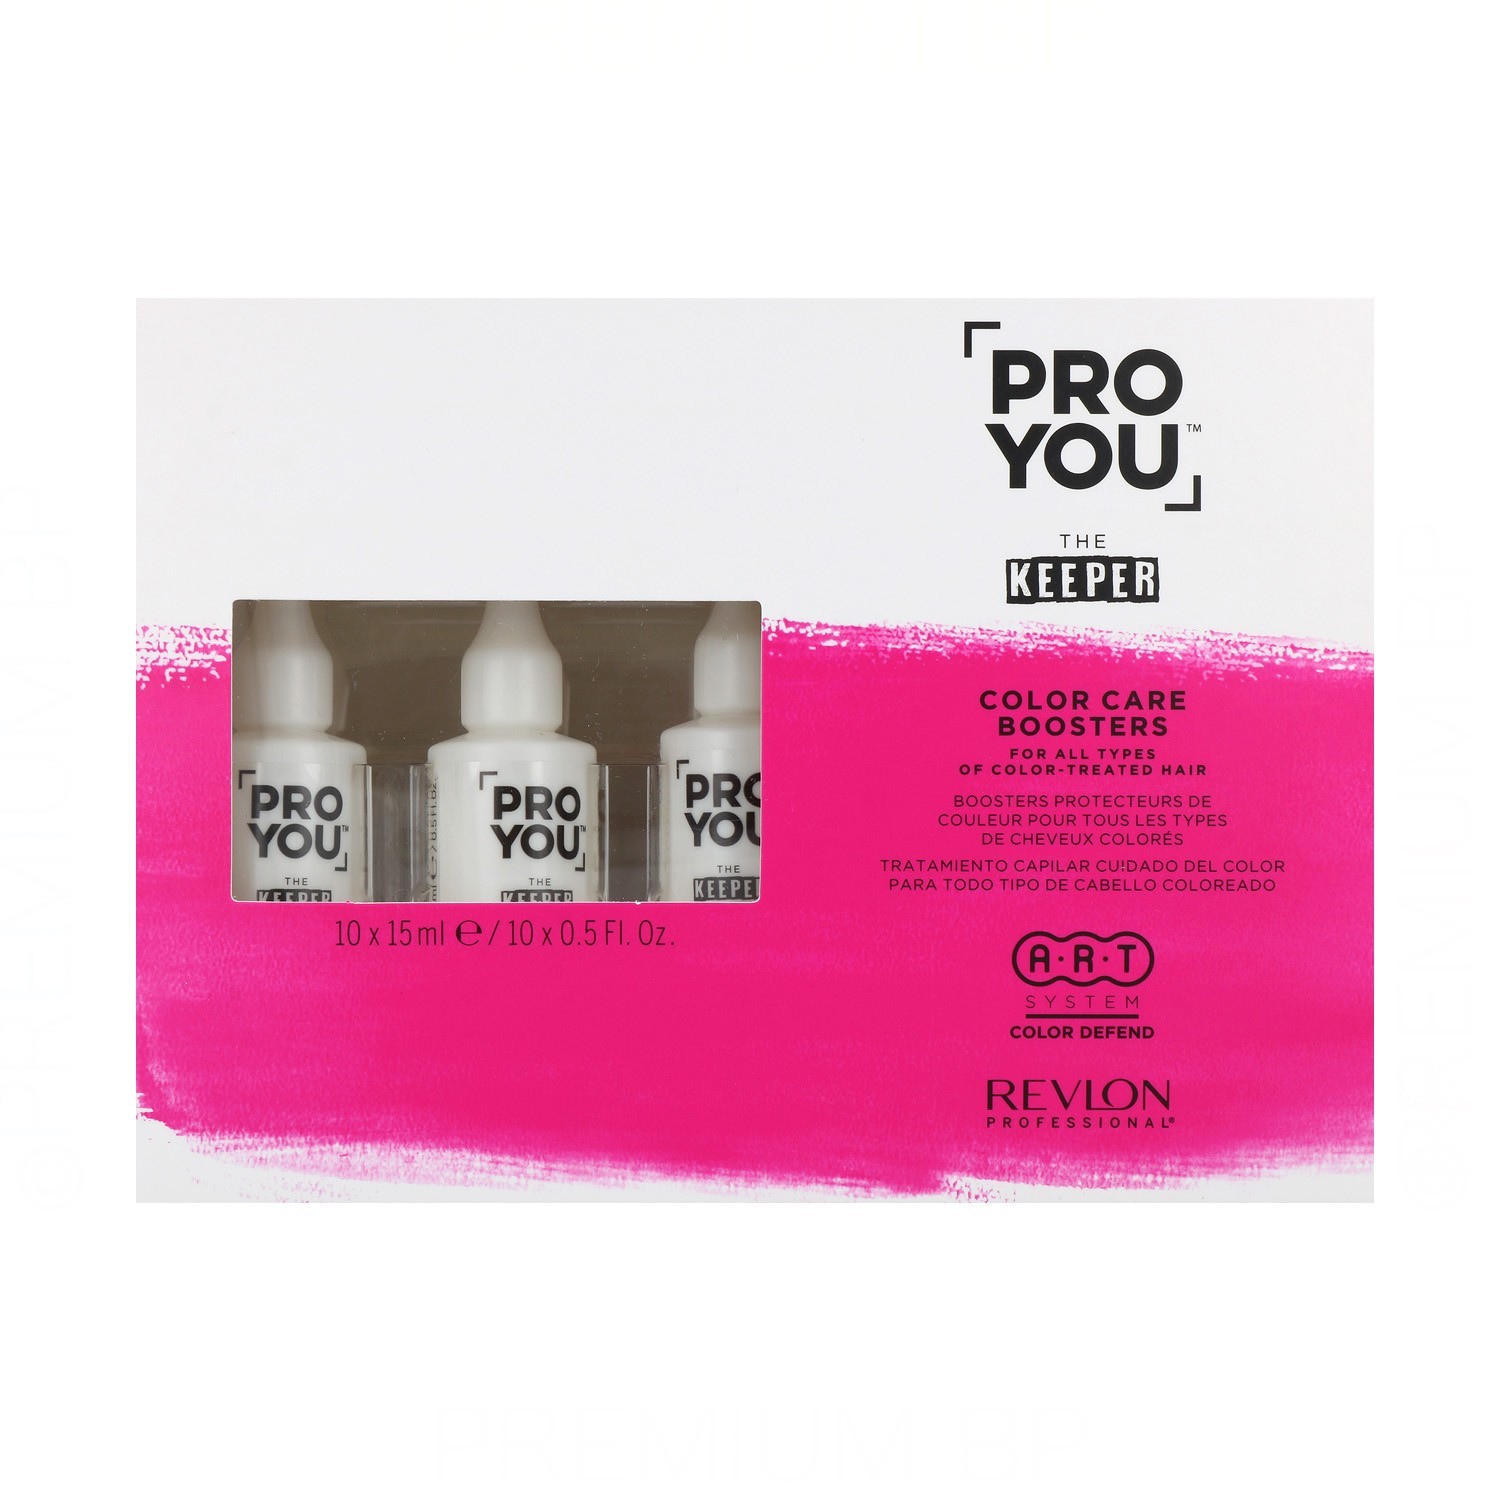 Revlon Pro You The Keeper Color Care Ampollas 10X15 ml